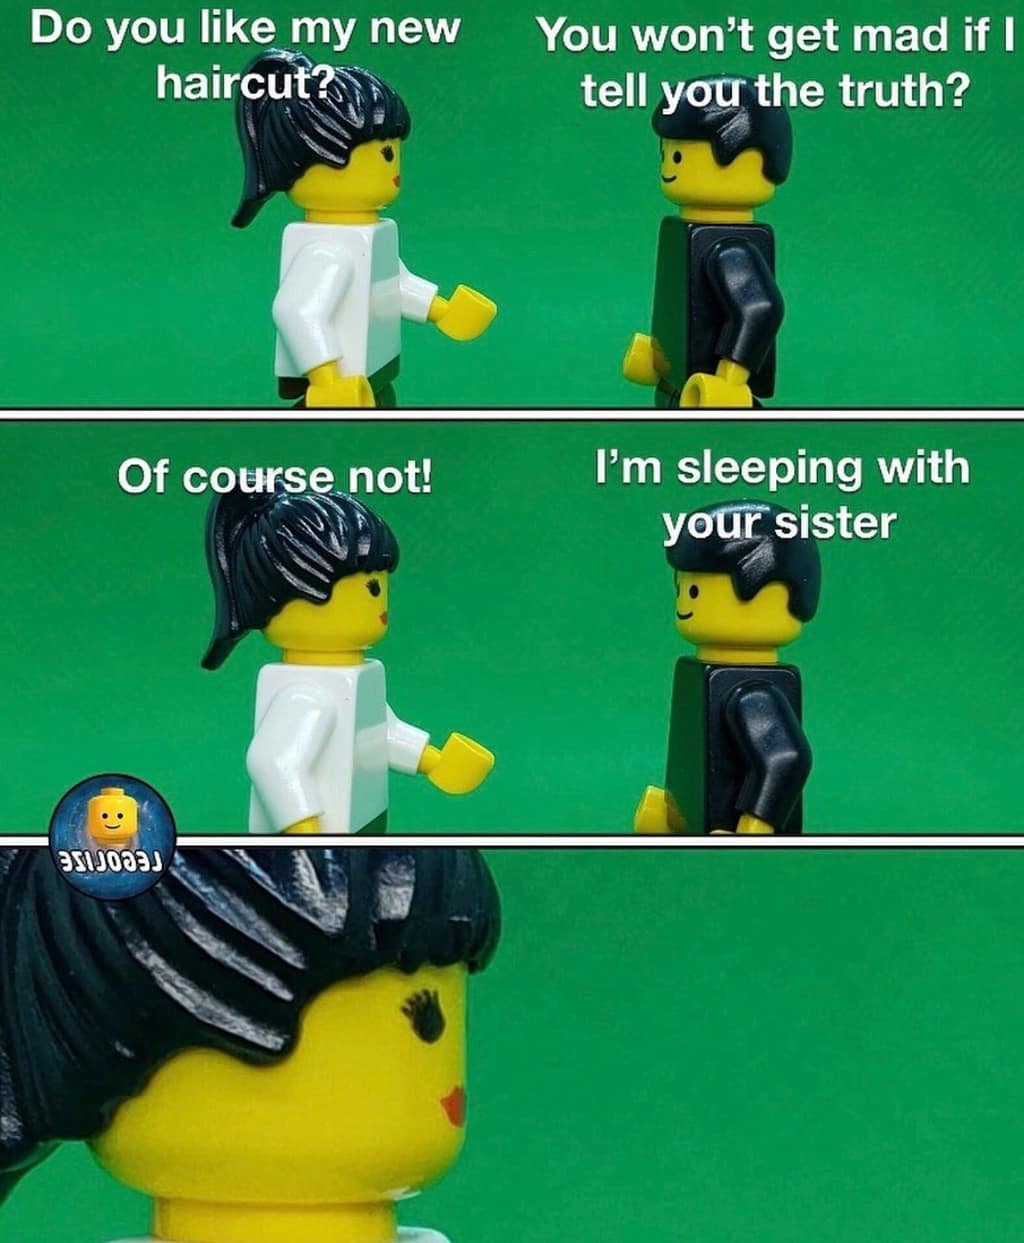 lego meme do you like my hair - Do you my new haircut? You won't get mad if I tell you the truth? Of course not! I'm sleeping with your sister 351083